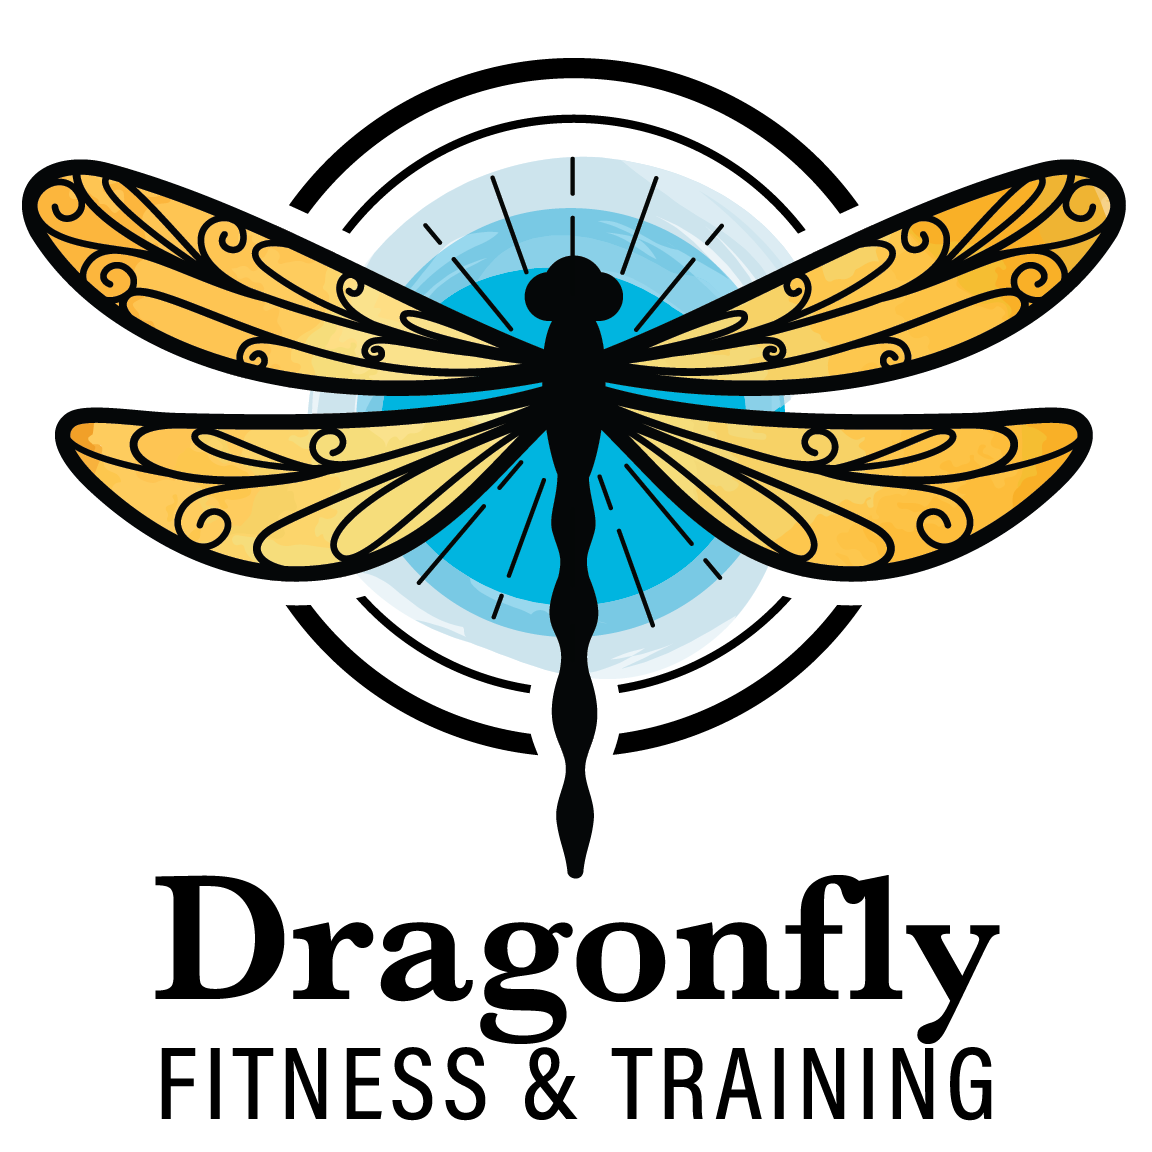 Dragonfly Fitness & Training